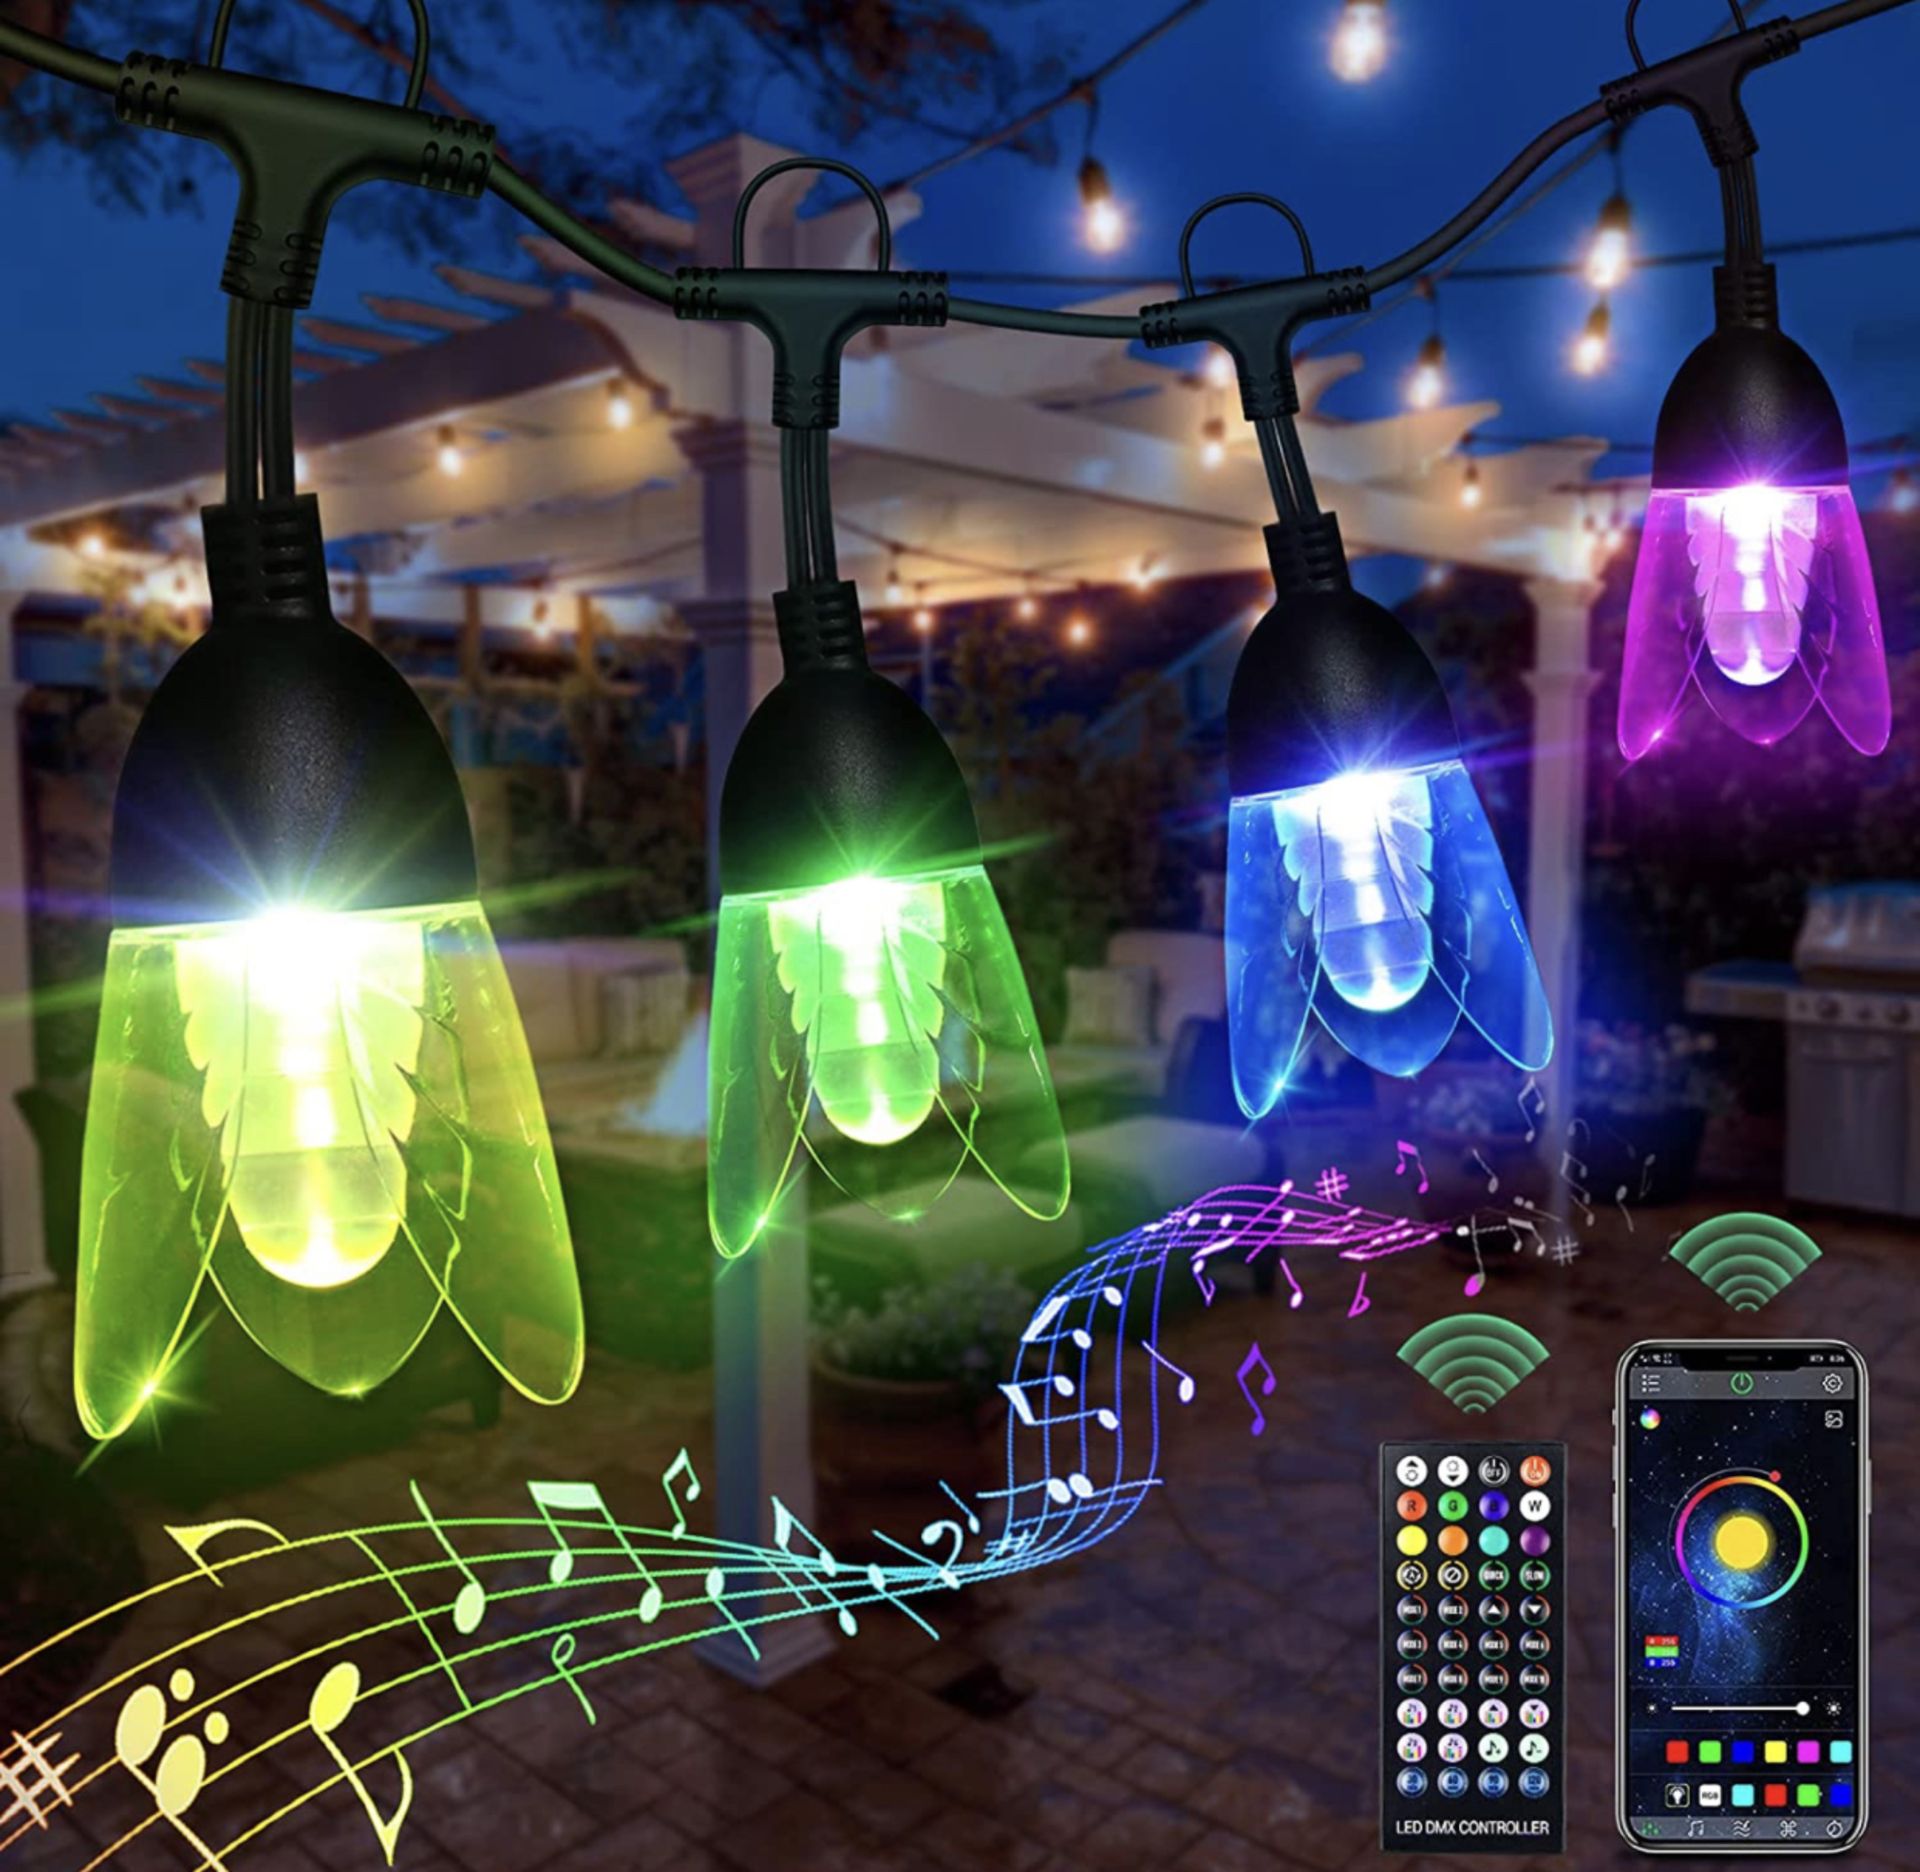 Outdoor Garden String Lights 11M/36Ft Christmas Smart Lights with Remote Control